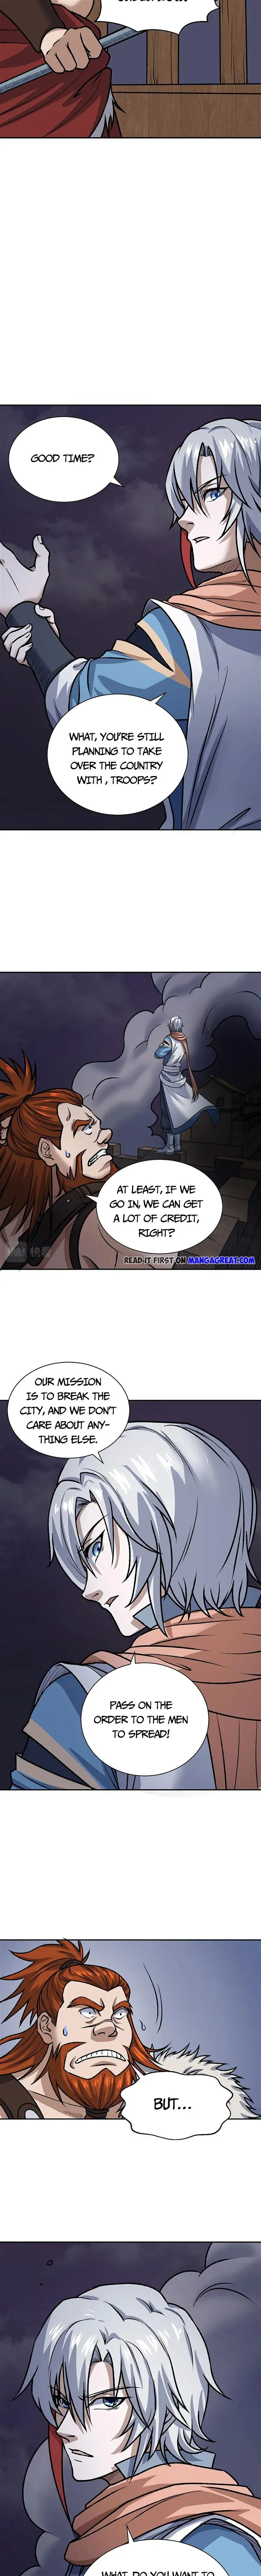 Martial Arts Reigns Chapter 484 page 2